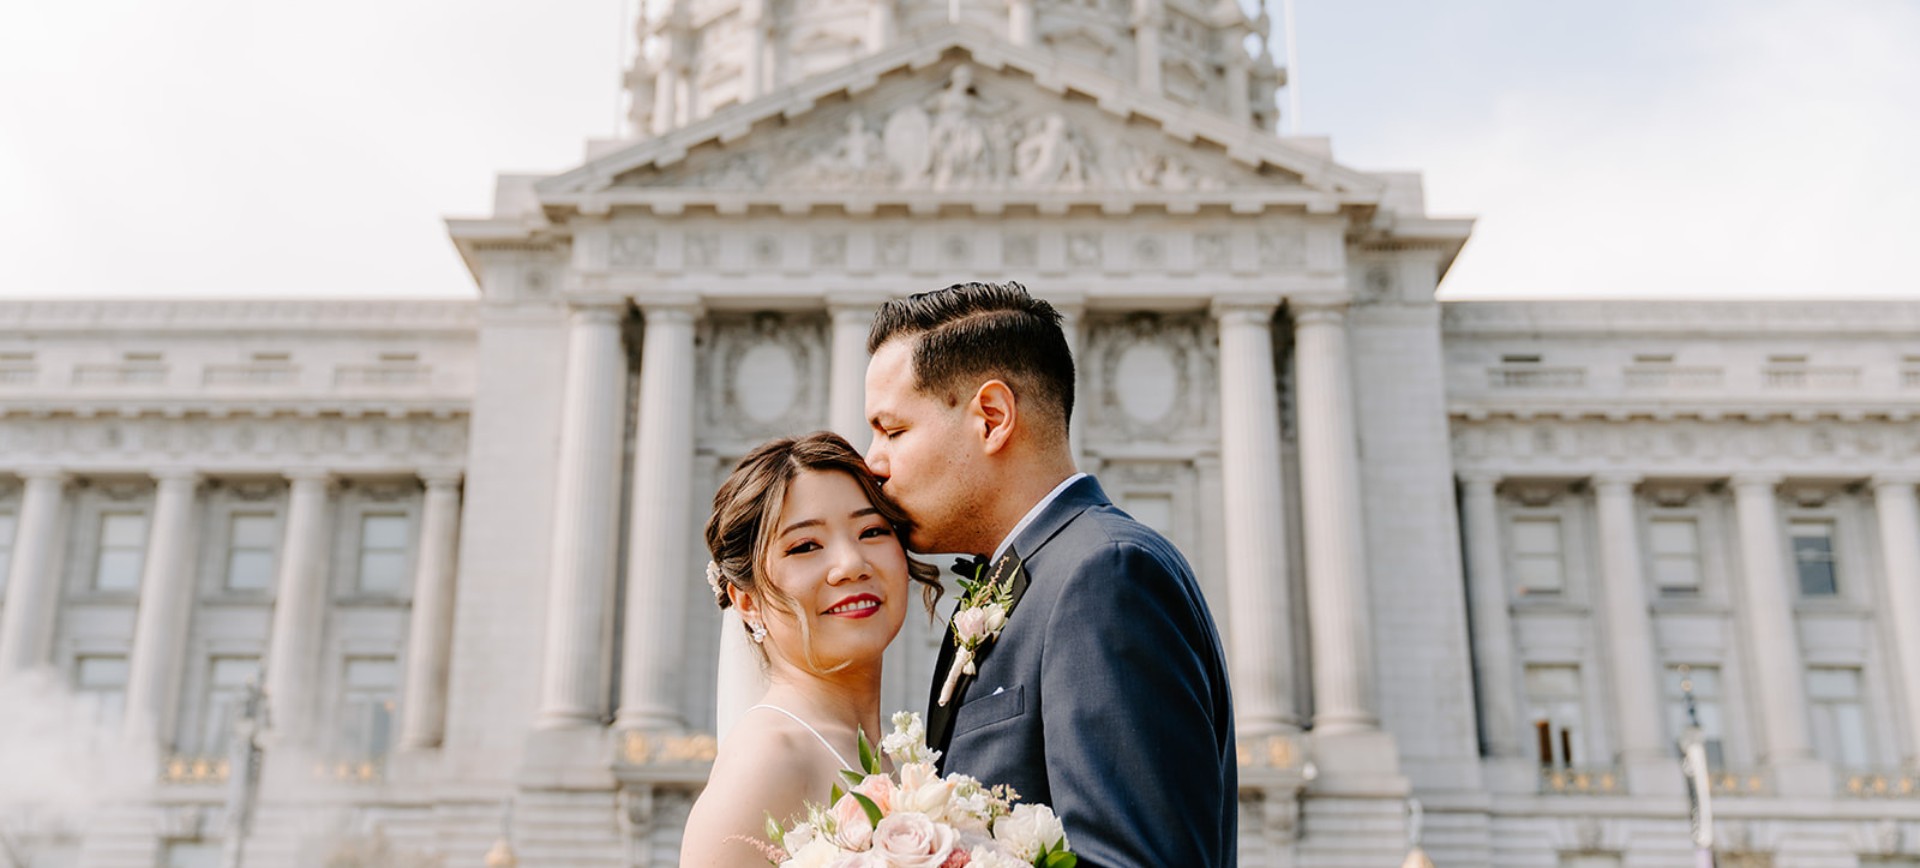 san francisco city hall elopement wedding package